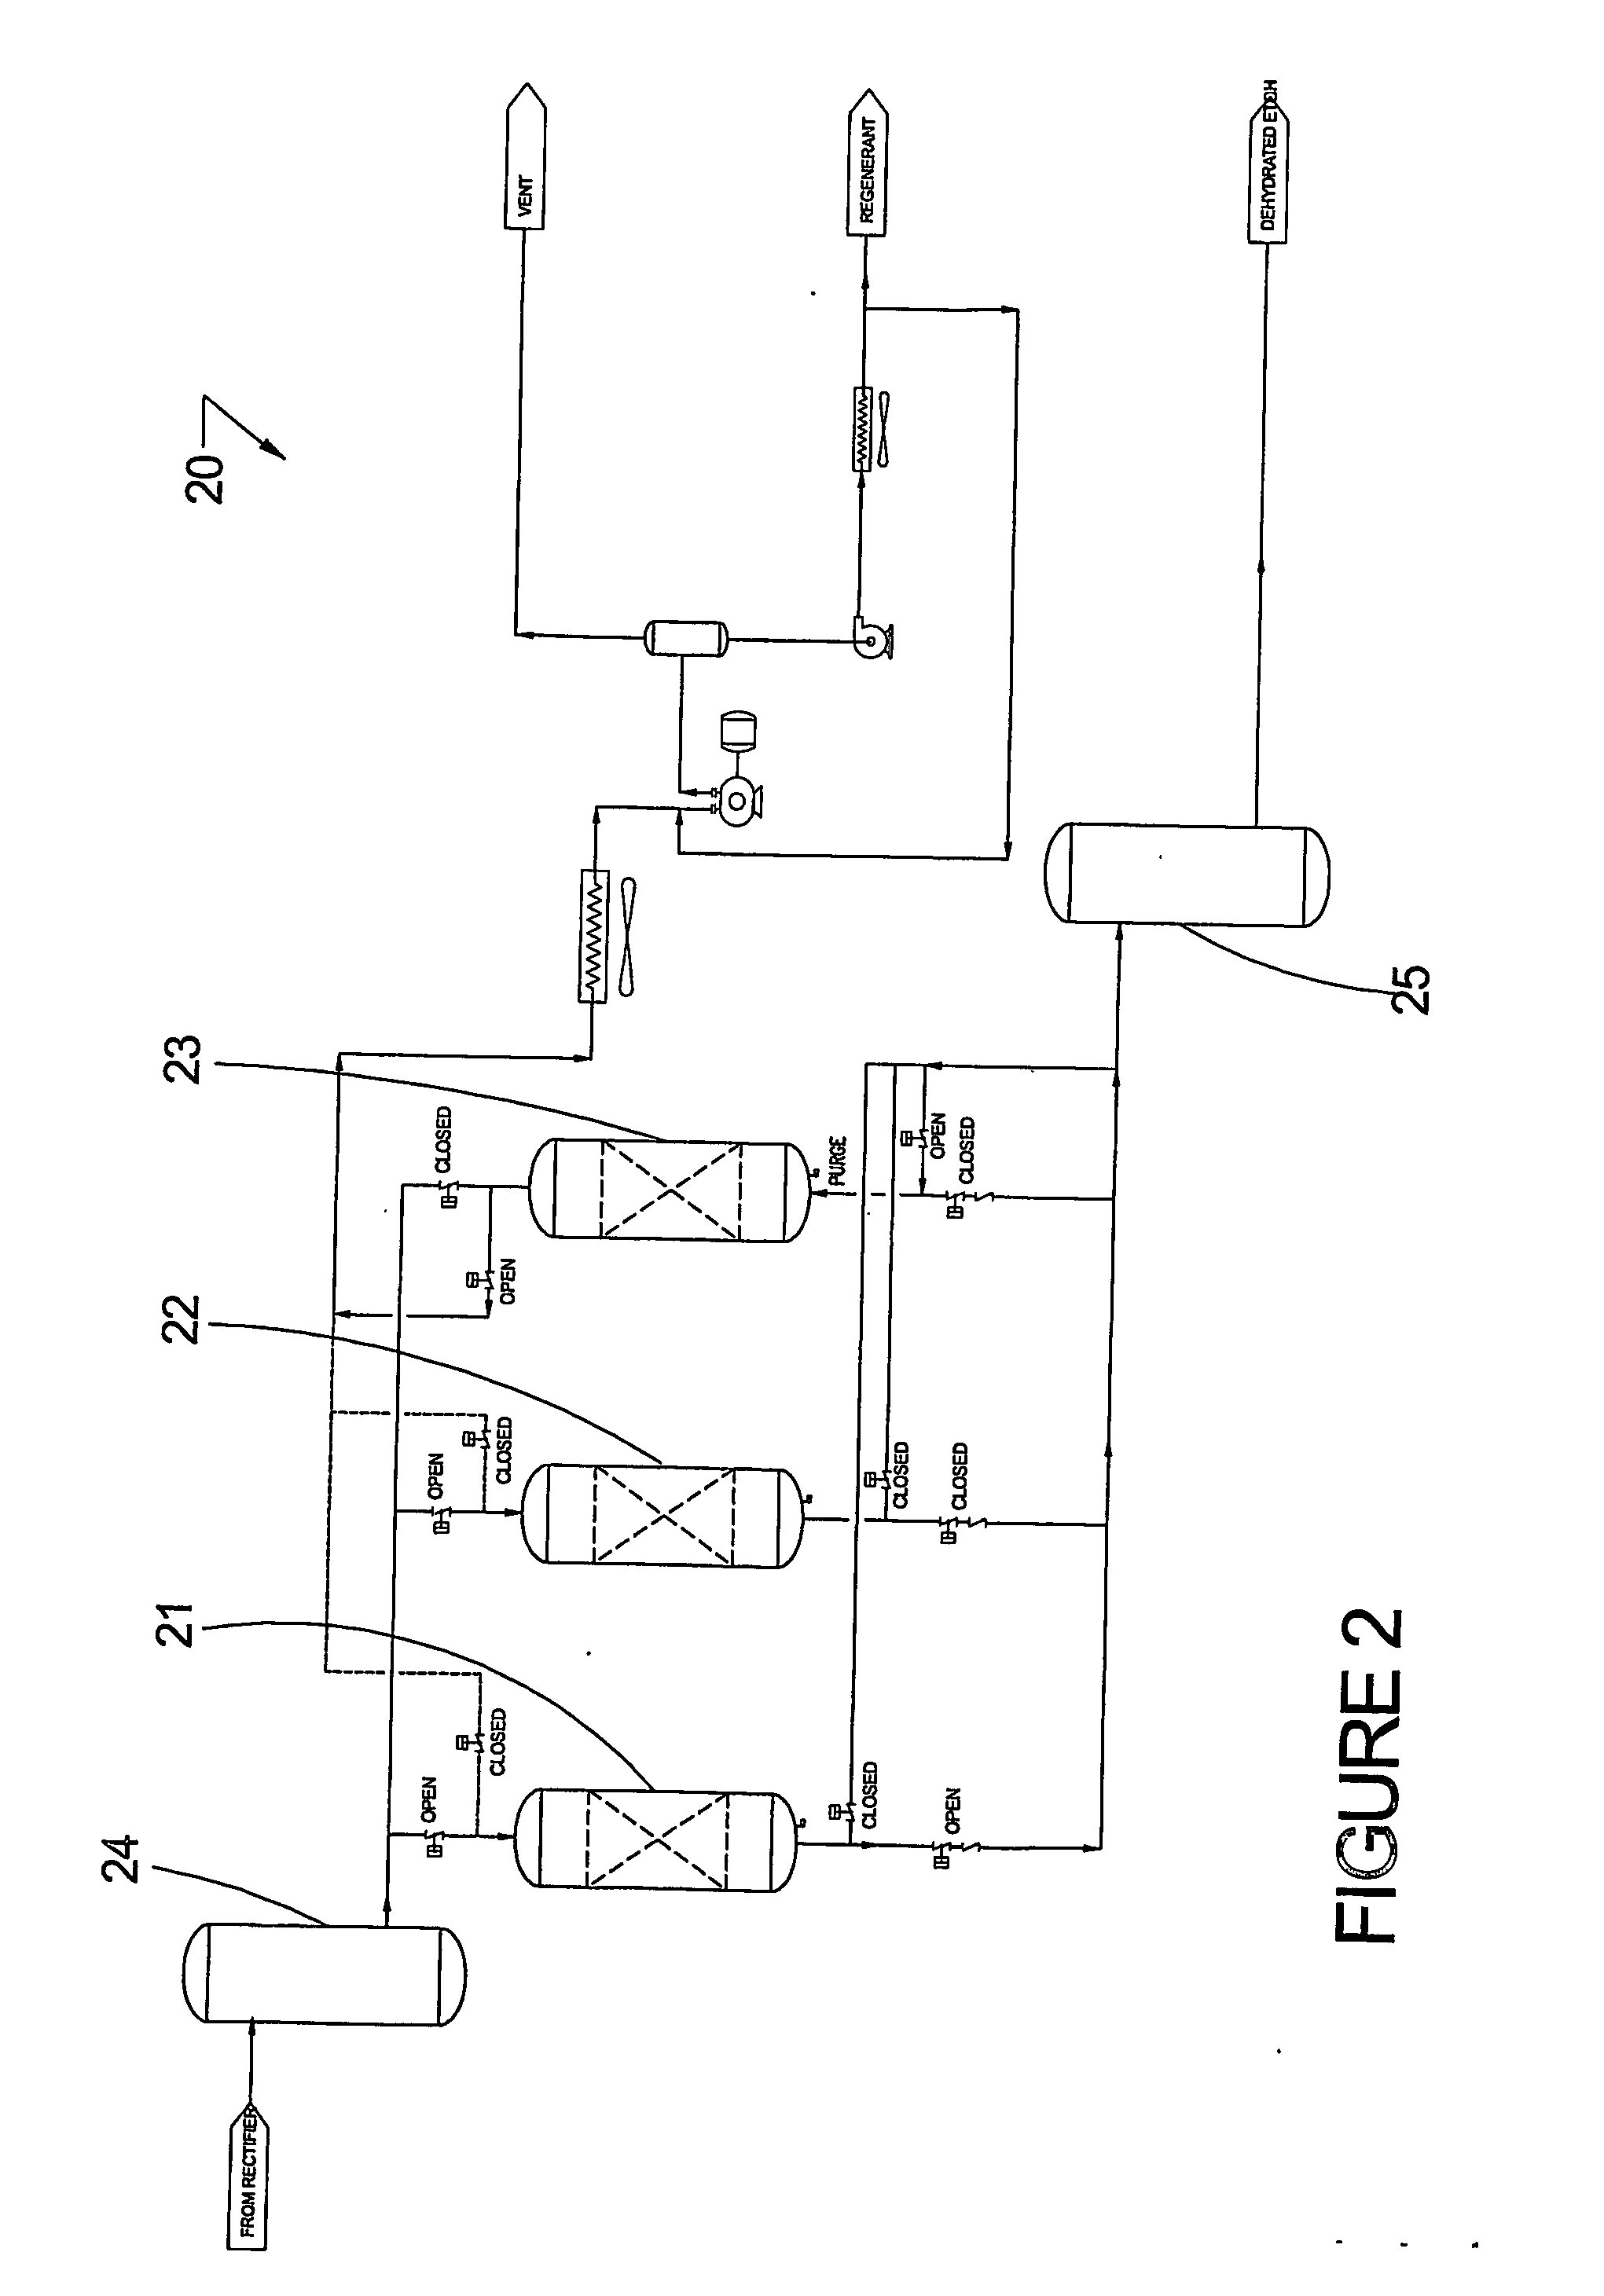 Ethanol distillation with distillers soluble solids recovery apparatus